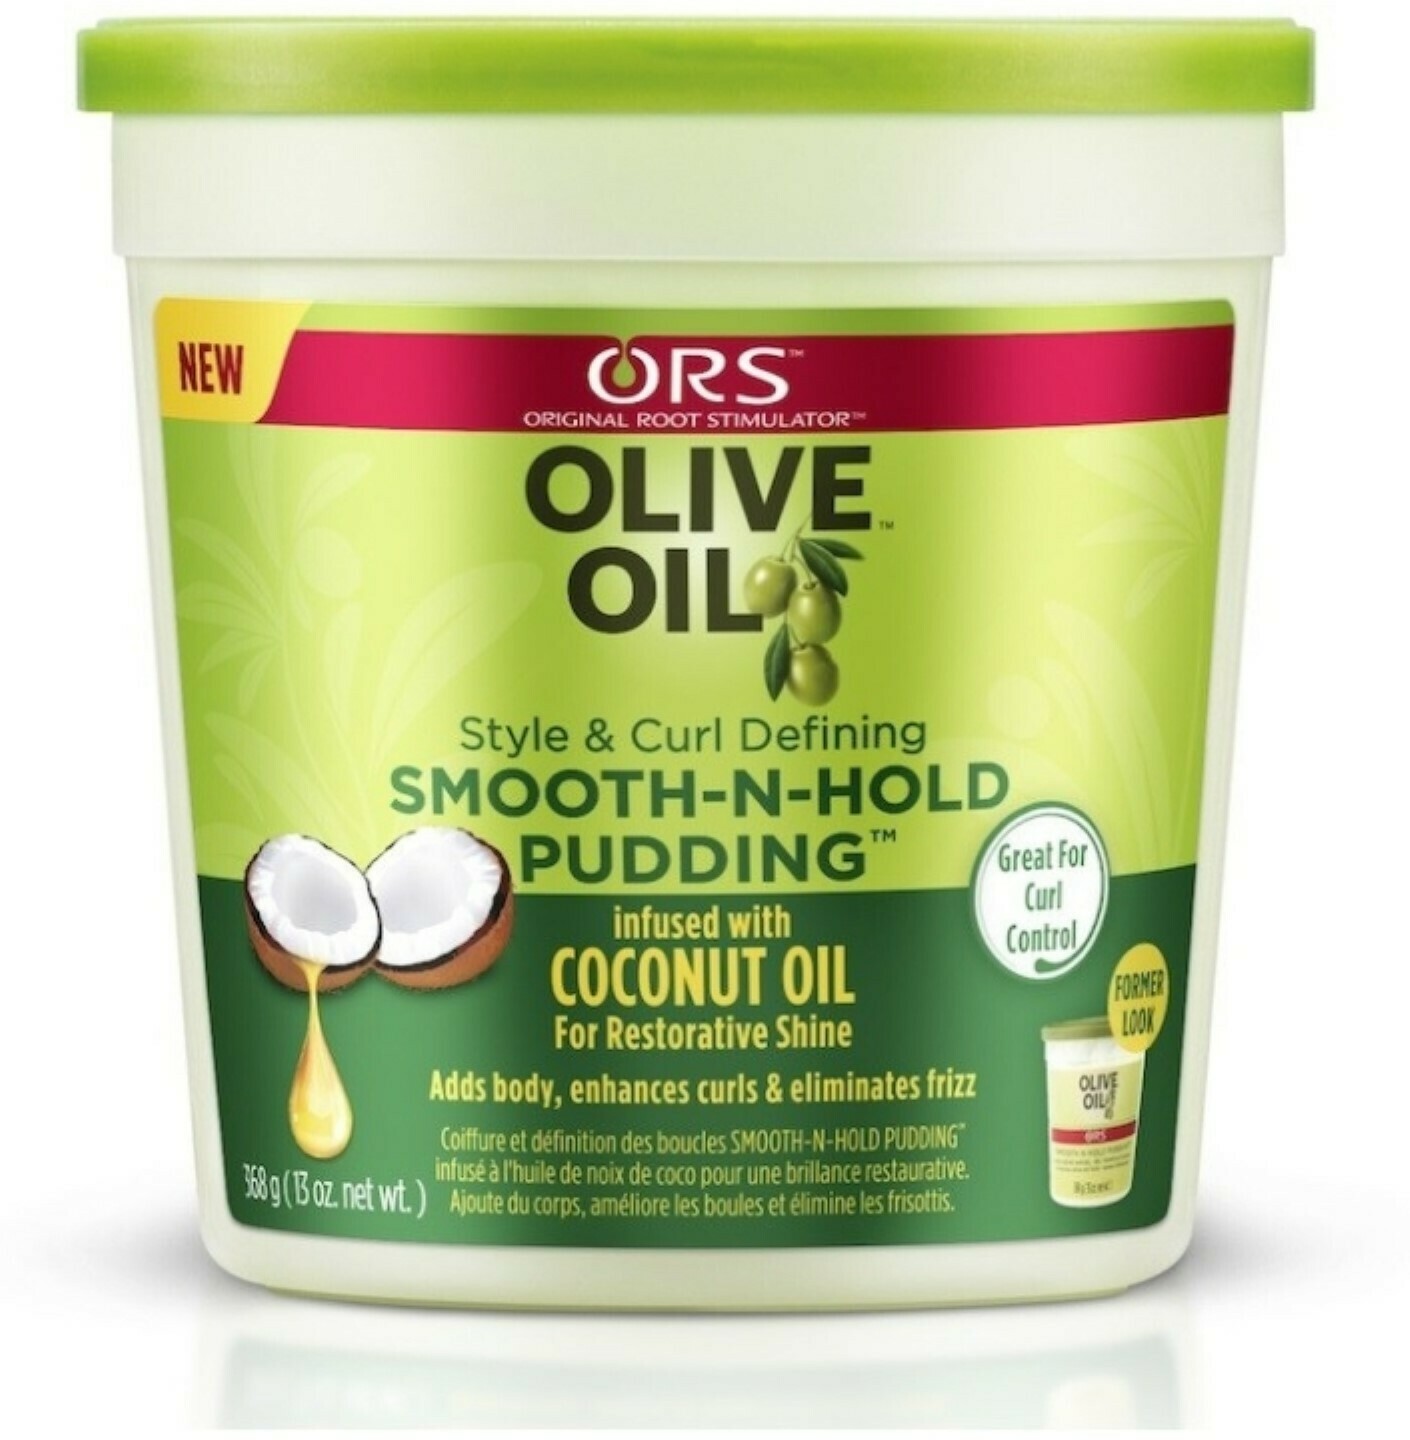 ORS Olive Oil Smooth-n-hold Pudding 13oz